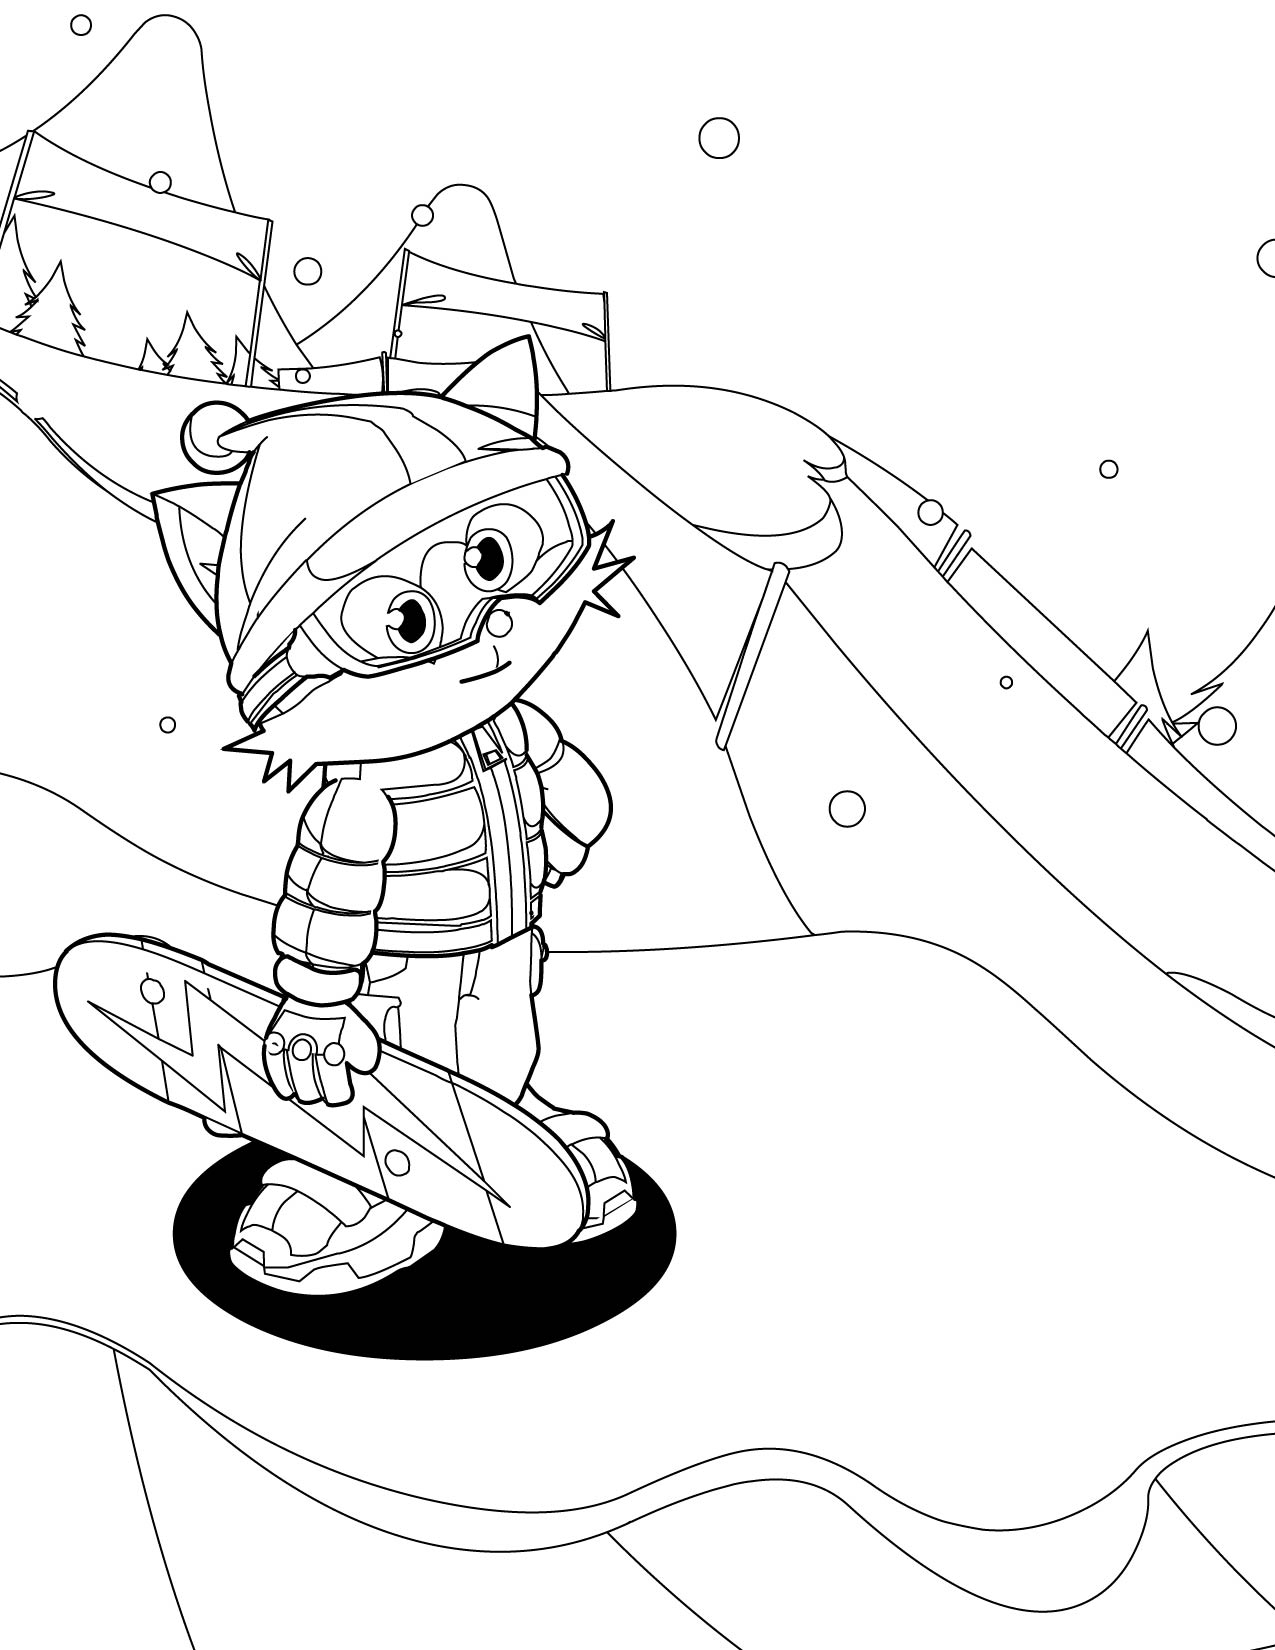 Snowboarding Coloring Pages at GetDrawings | Free download